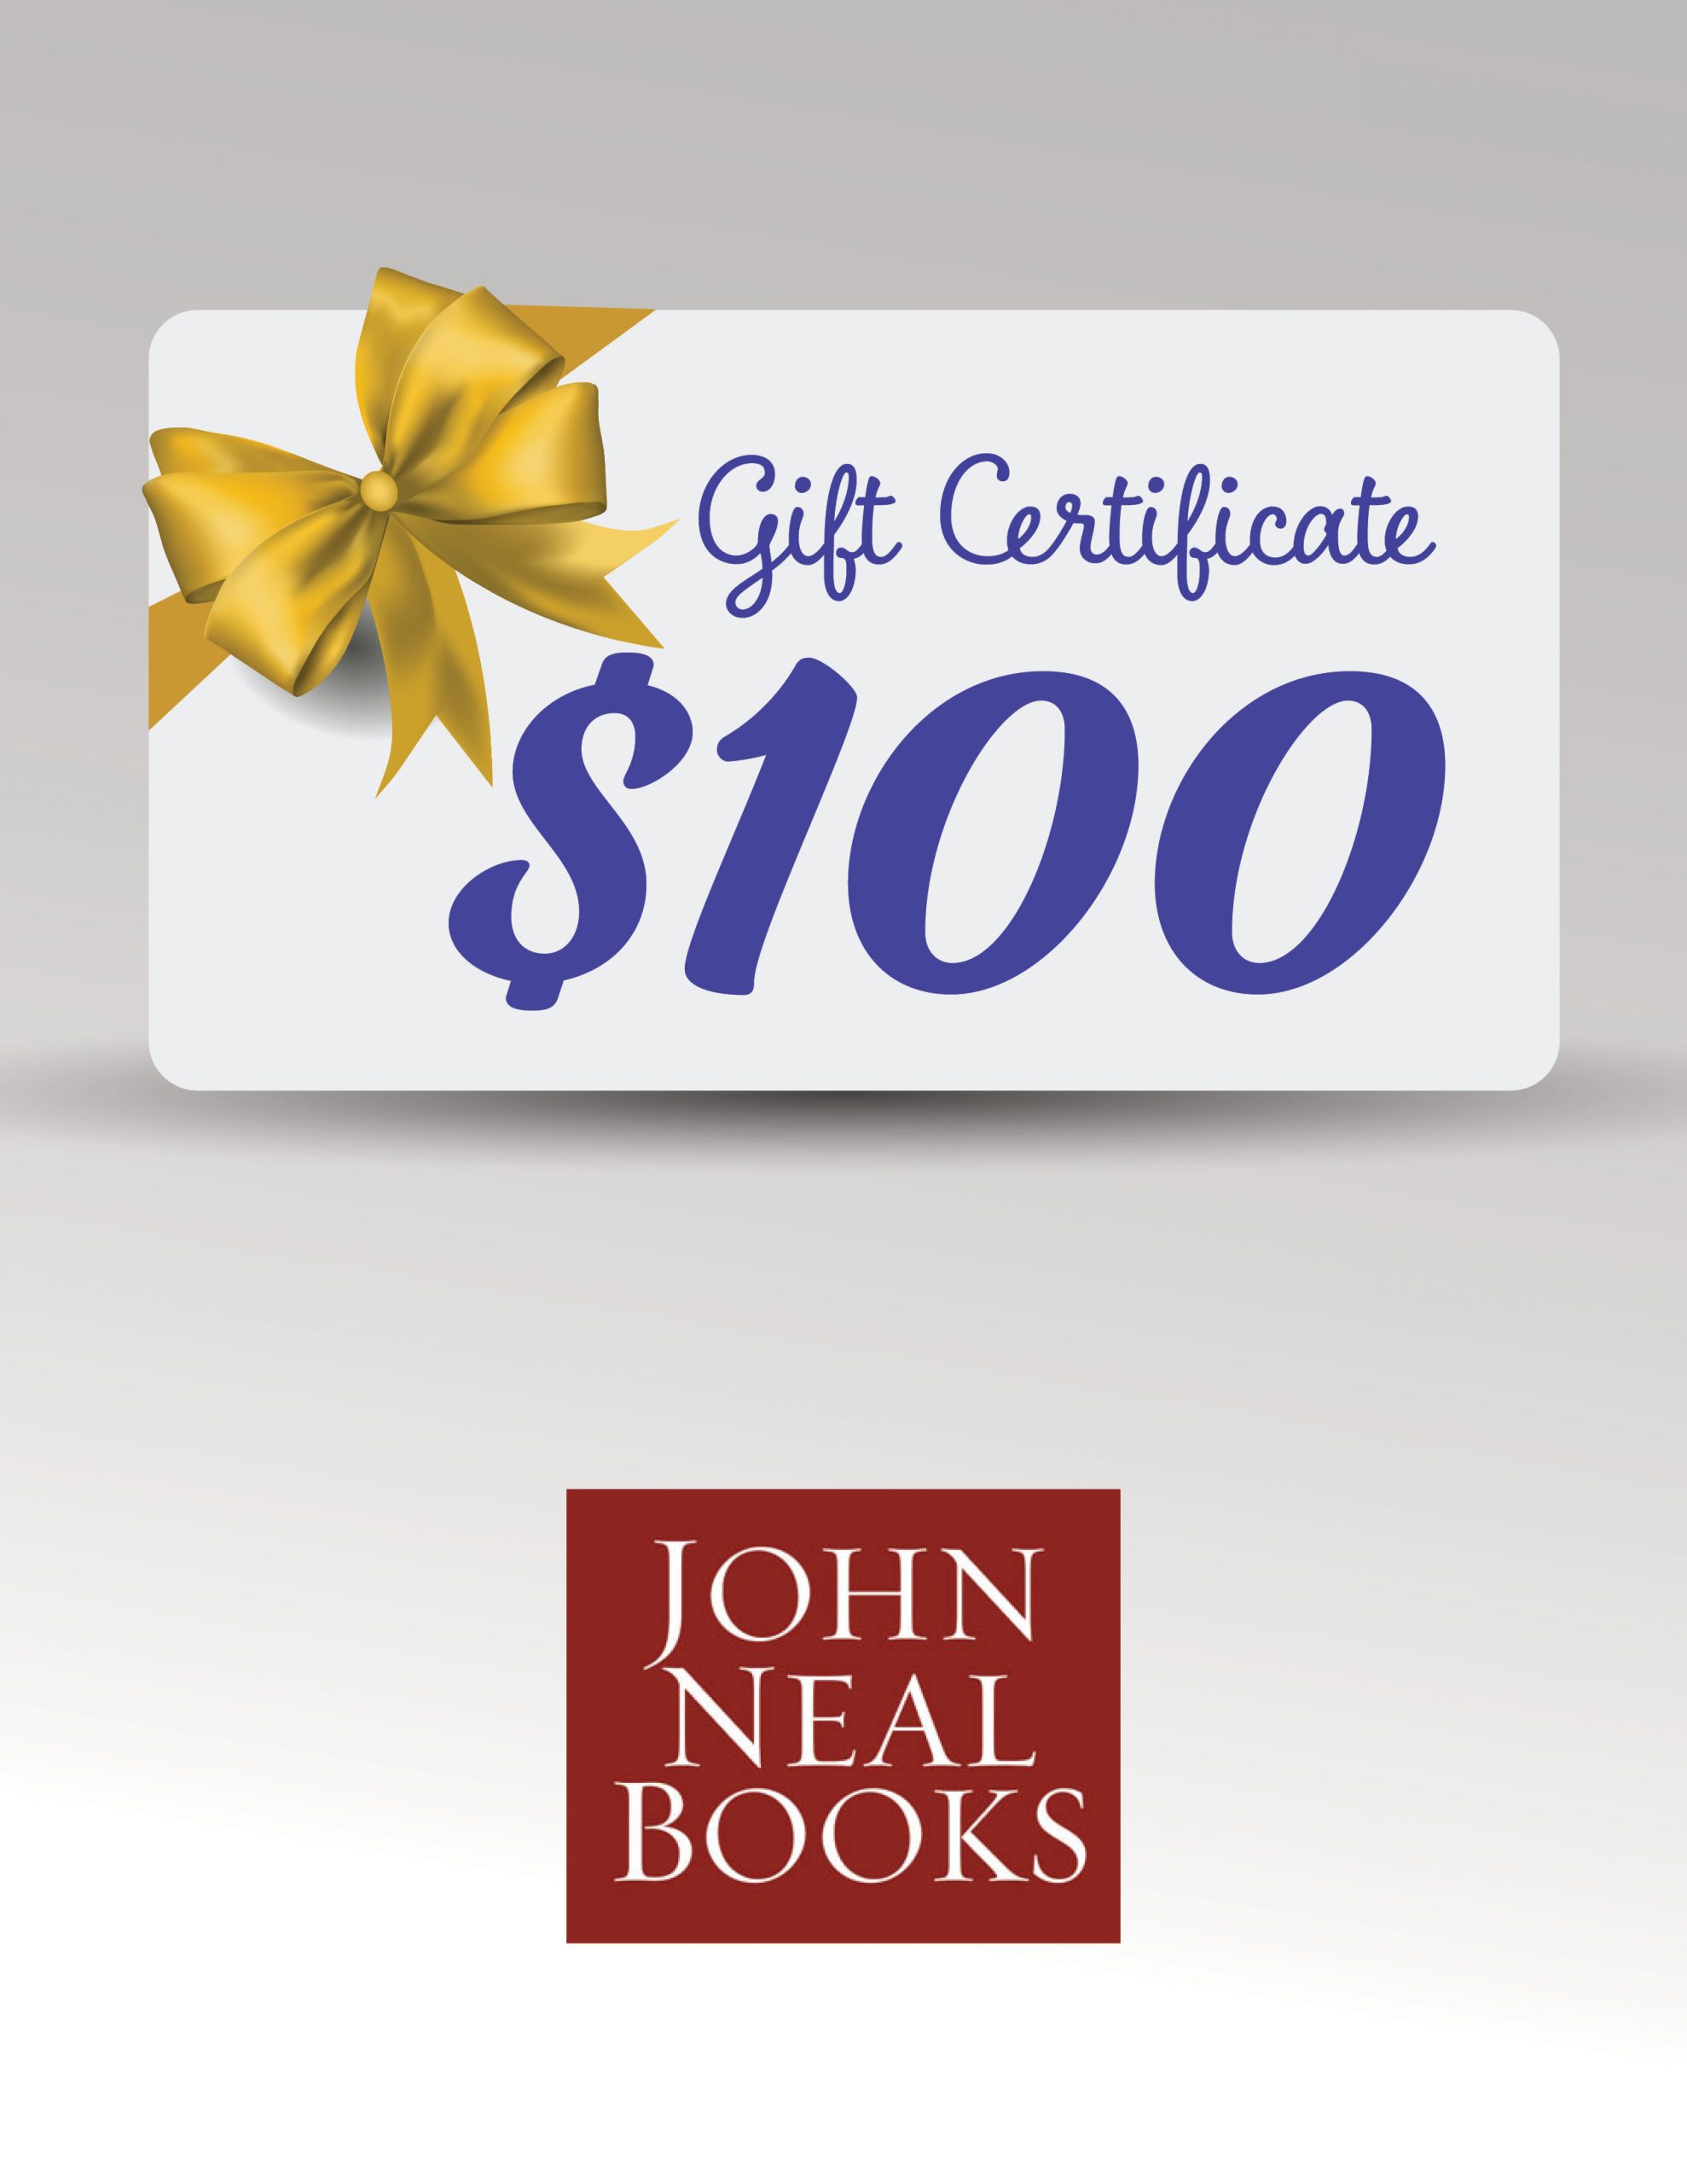 $100 Gift Certificate redeemable at John Neal Books